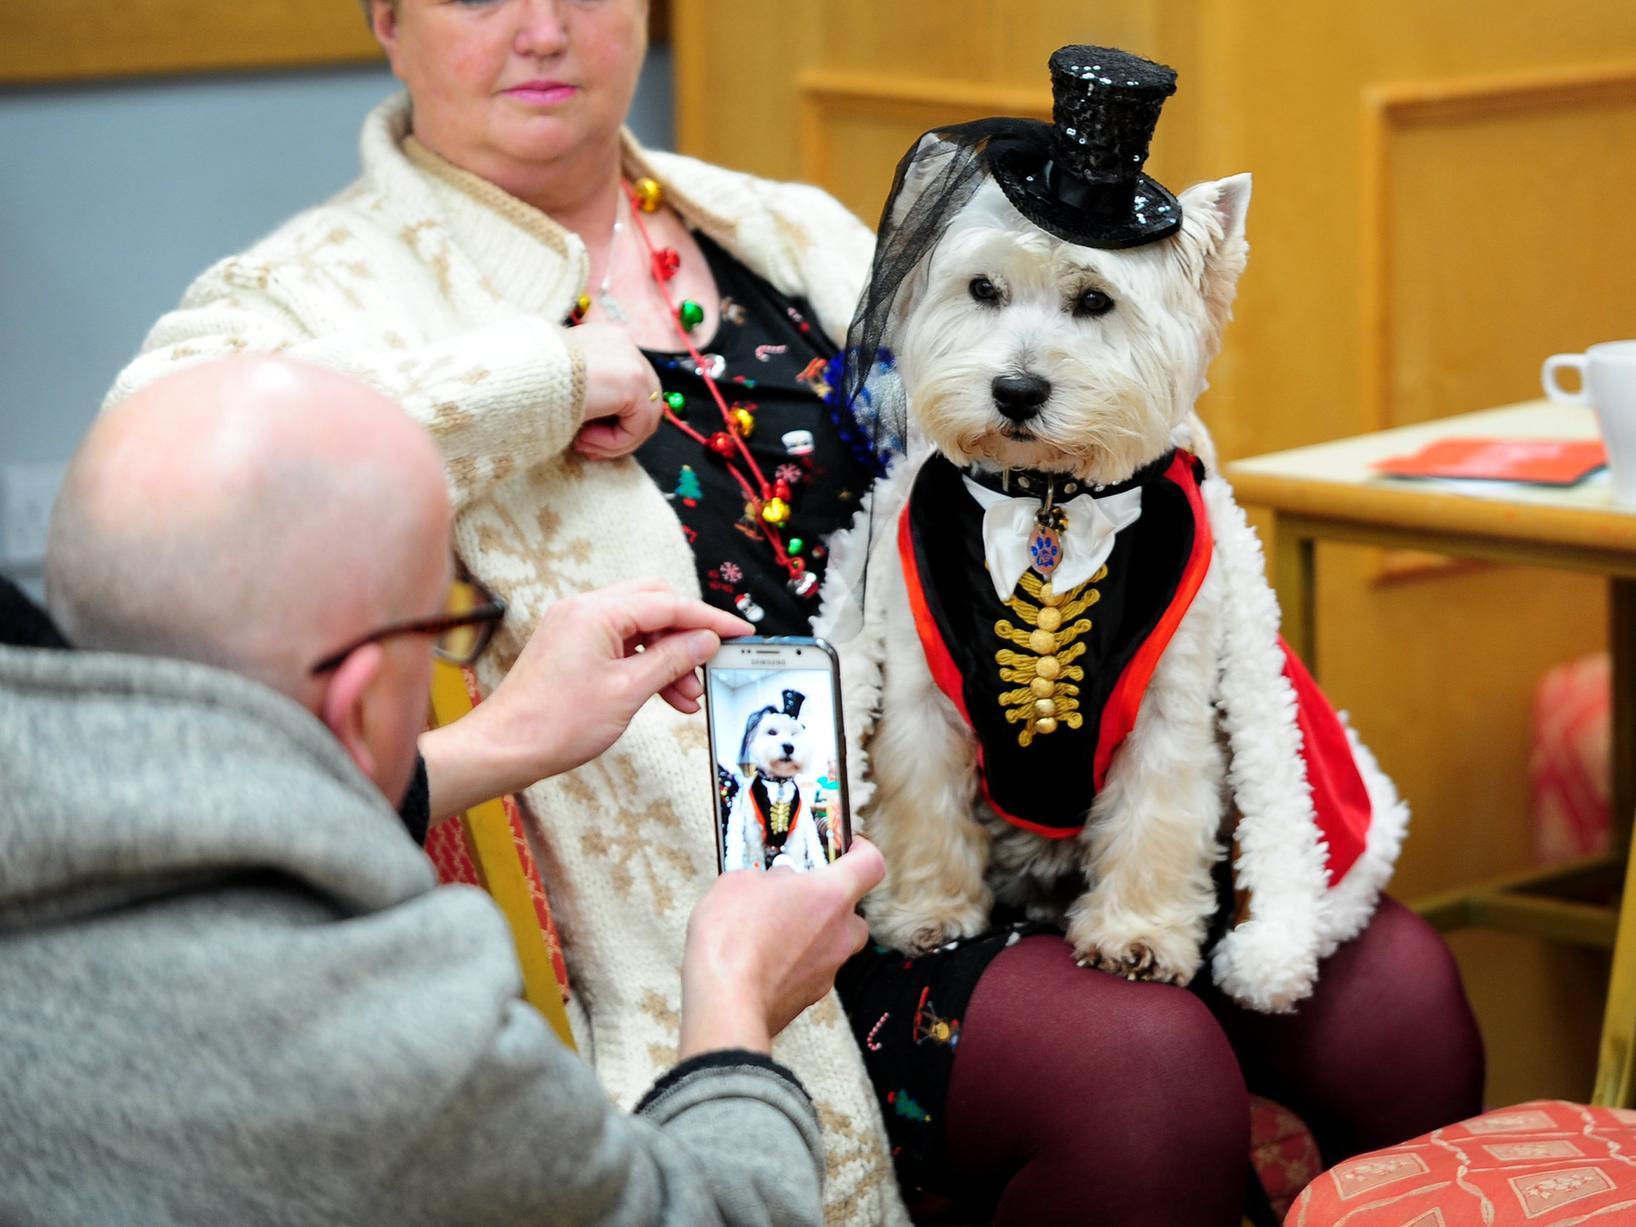 This smart pup has their photo taken in their bedazzling outfit, complete with tiny top hat.